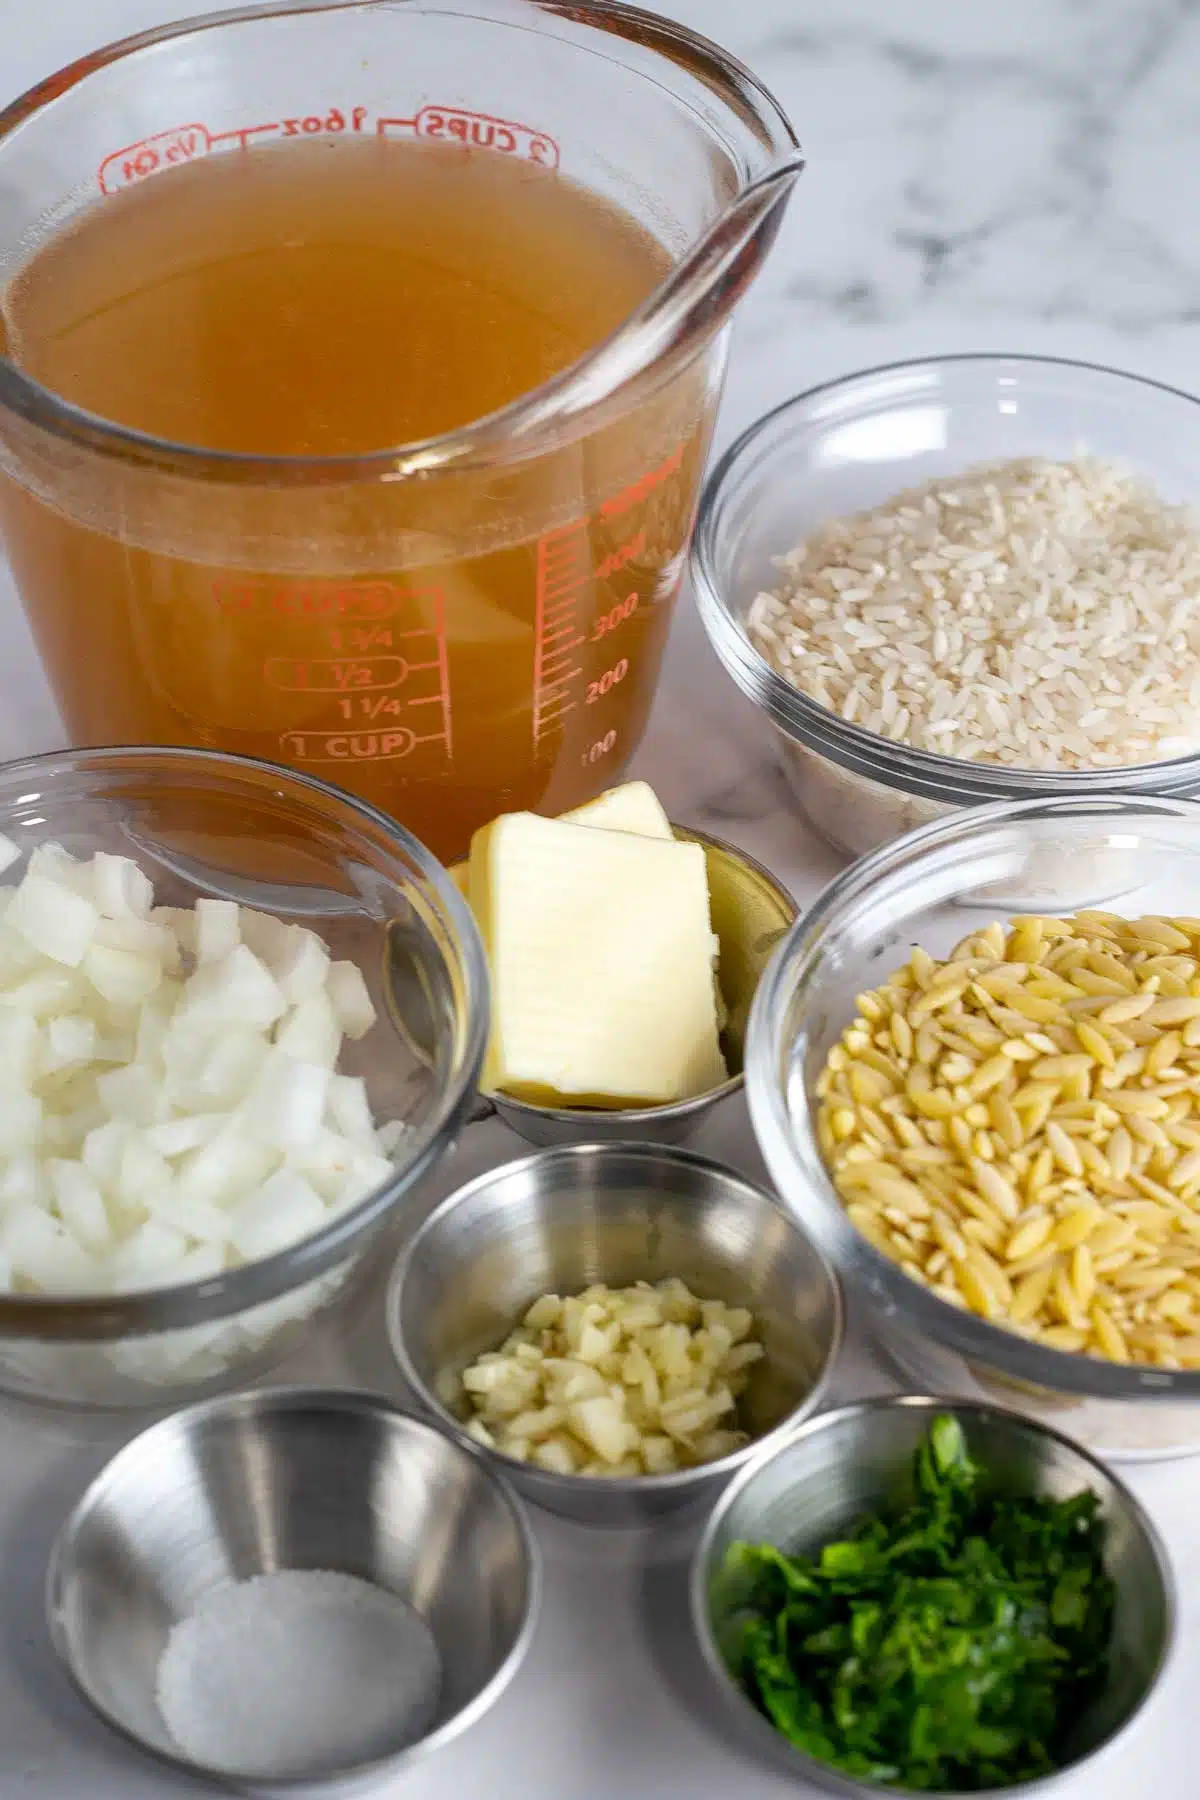 Rice pilaf ingredients measured out and ready to combine.